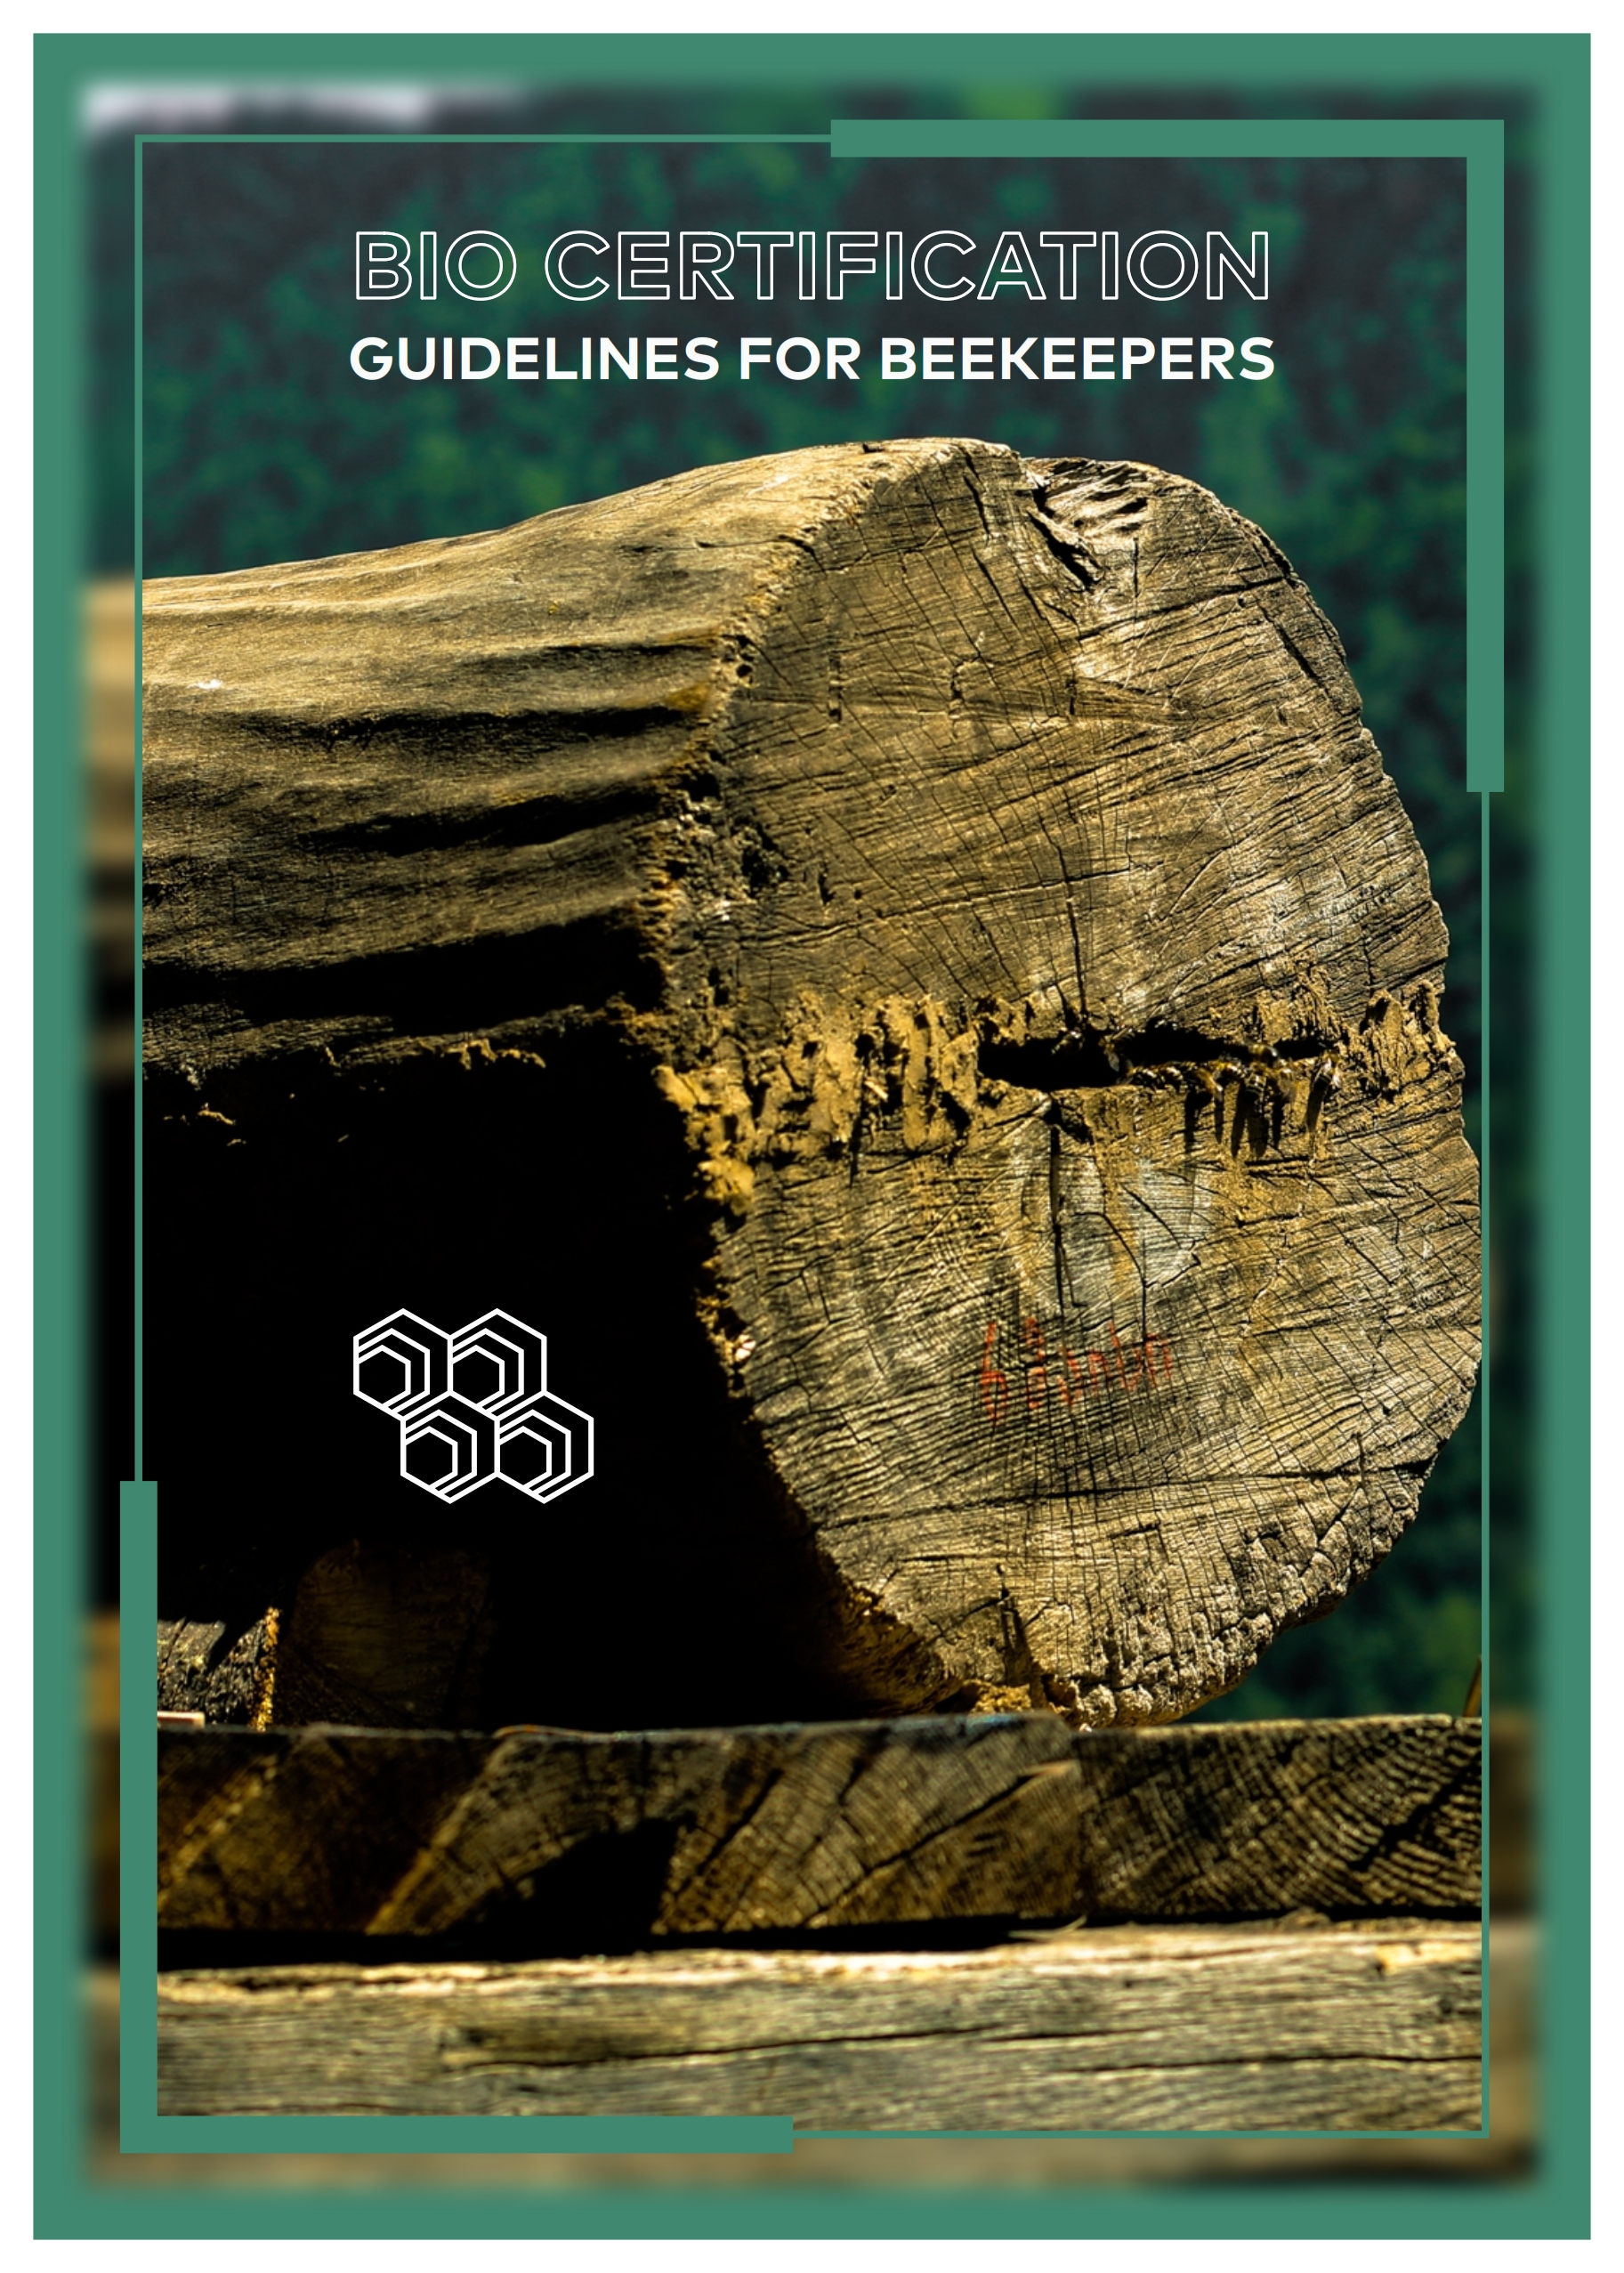 BIO CERTIFICATION GUIDELINES FOR BEEKEEPERS